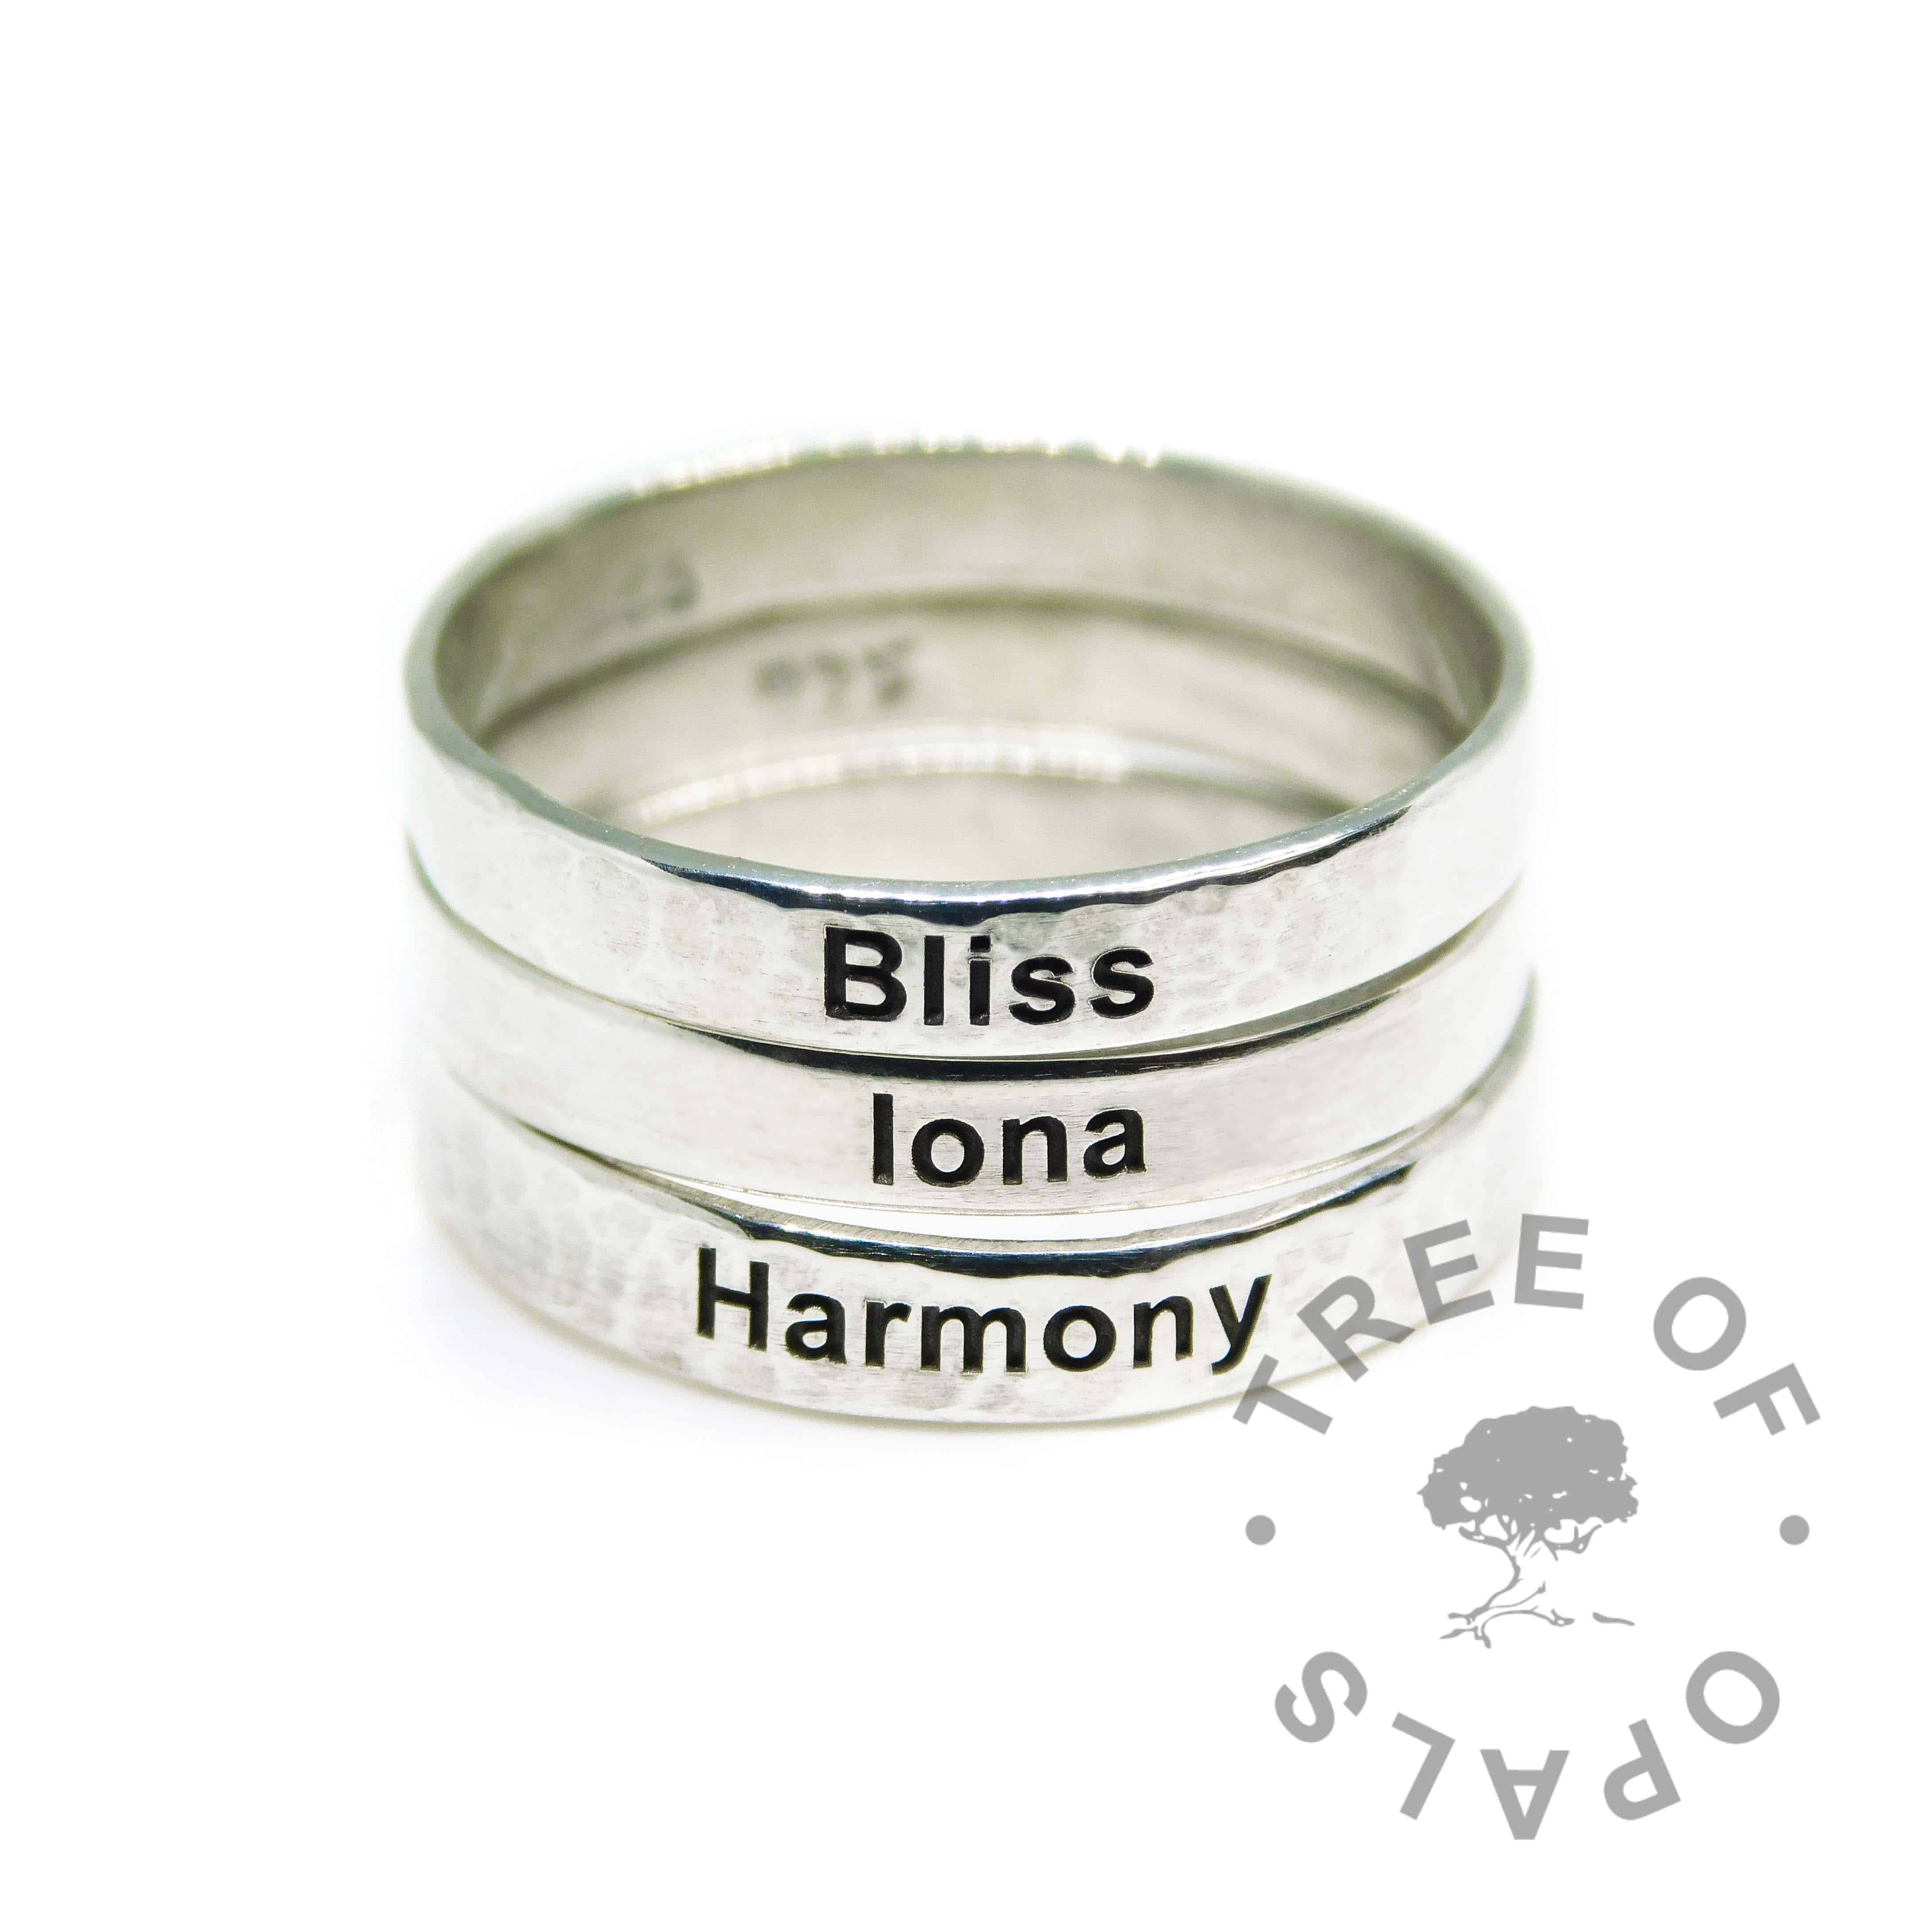 engraved ring stack, textured, brushed, textured. Memorial rings from Tree of Opals with solid sterling EcoSilver band. Engraved on the outside in Arial font